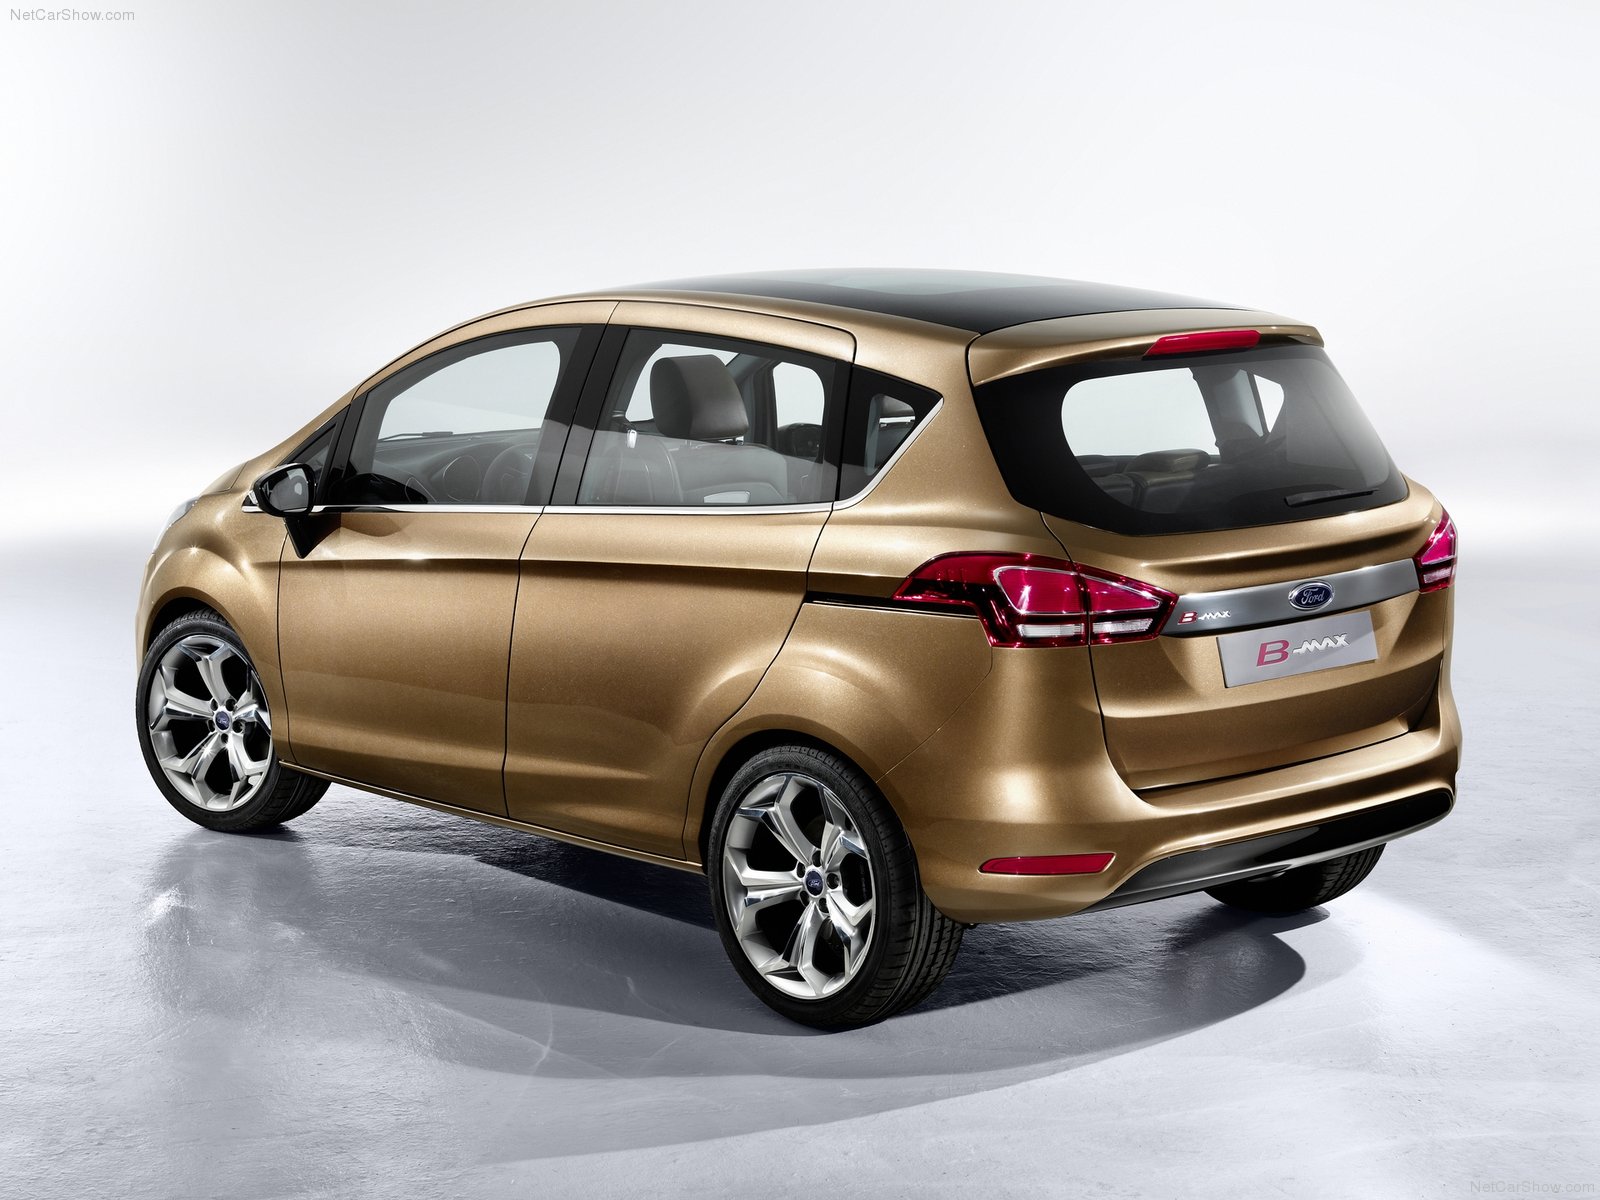 2013 Ford B-MAX Release | World Of Car Fans